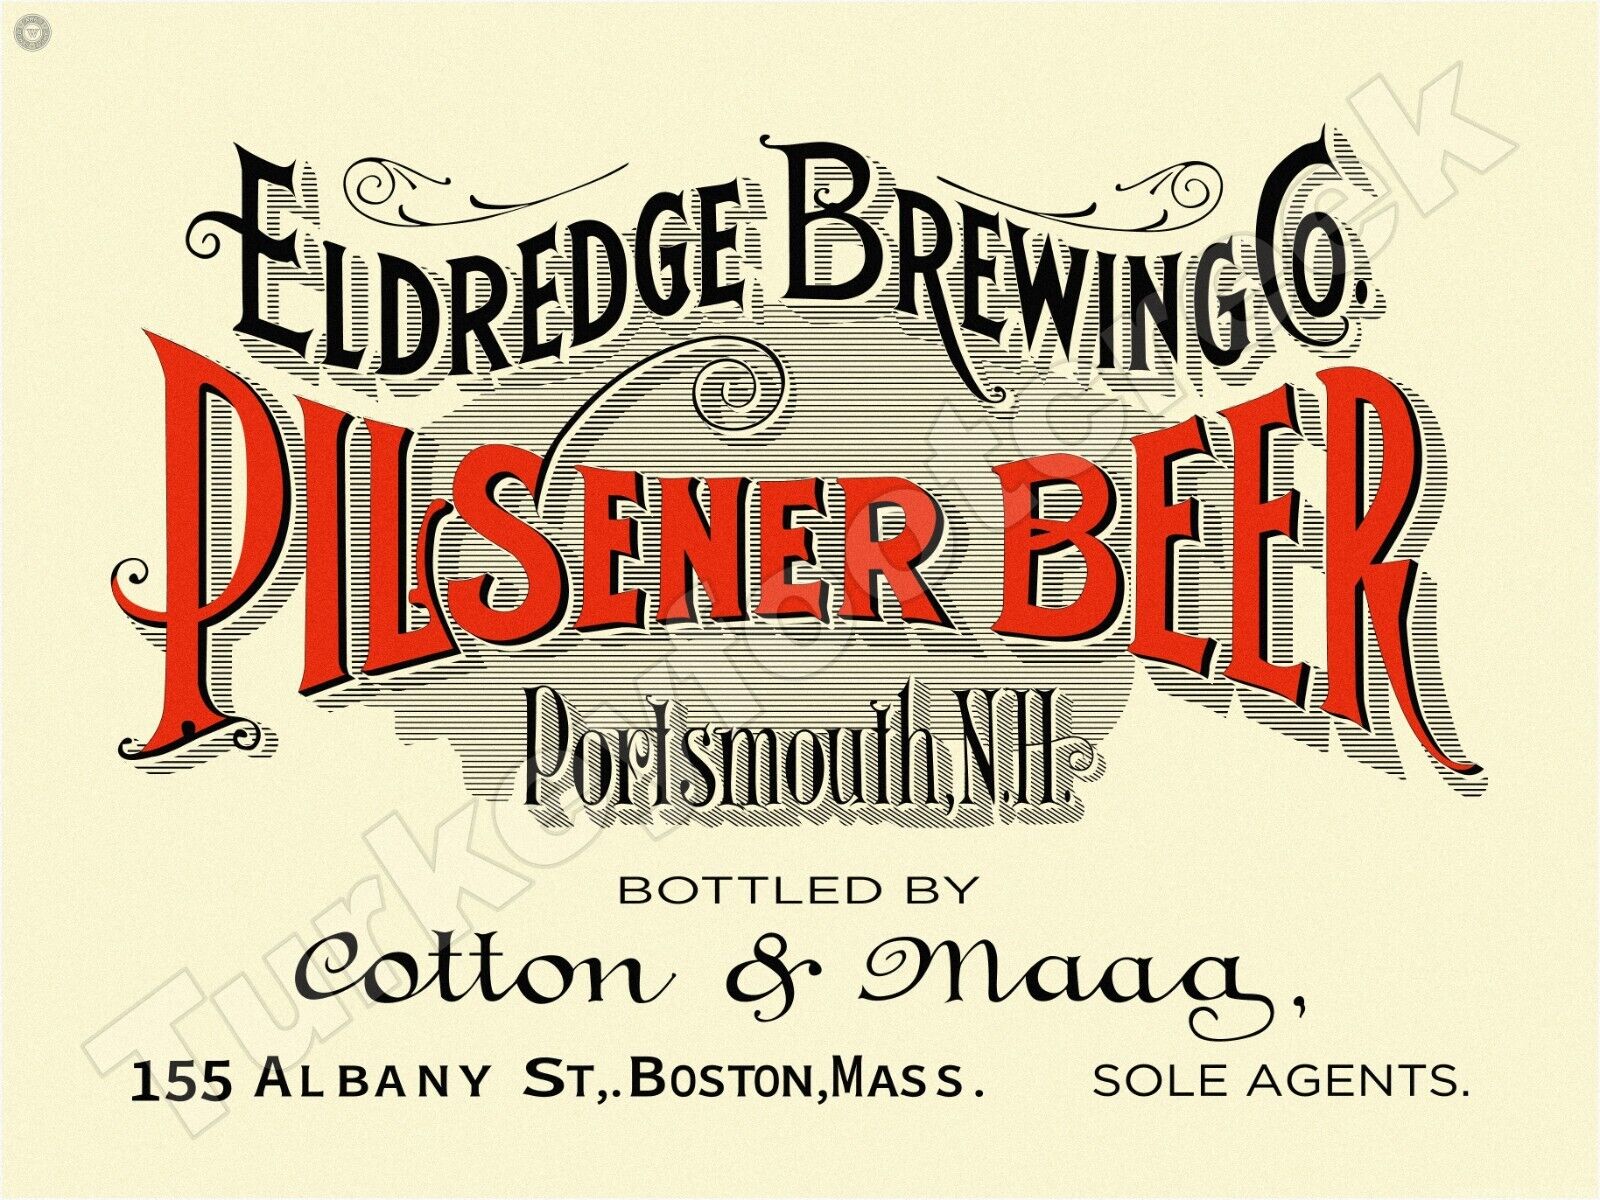 Eldredge Brewing Company Pilsener Beer Metal Sign 3 Sizes to Choose From